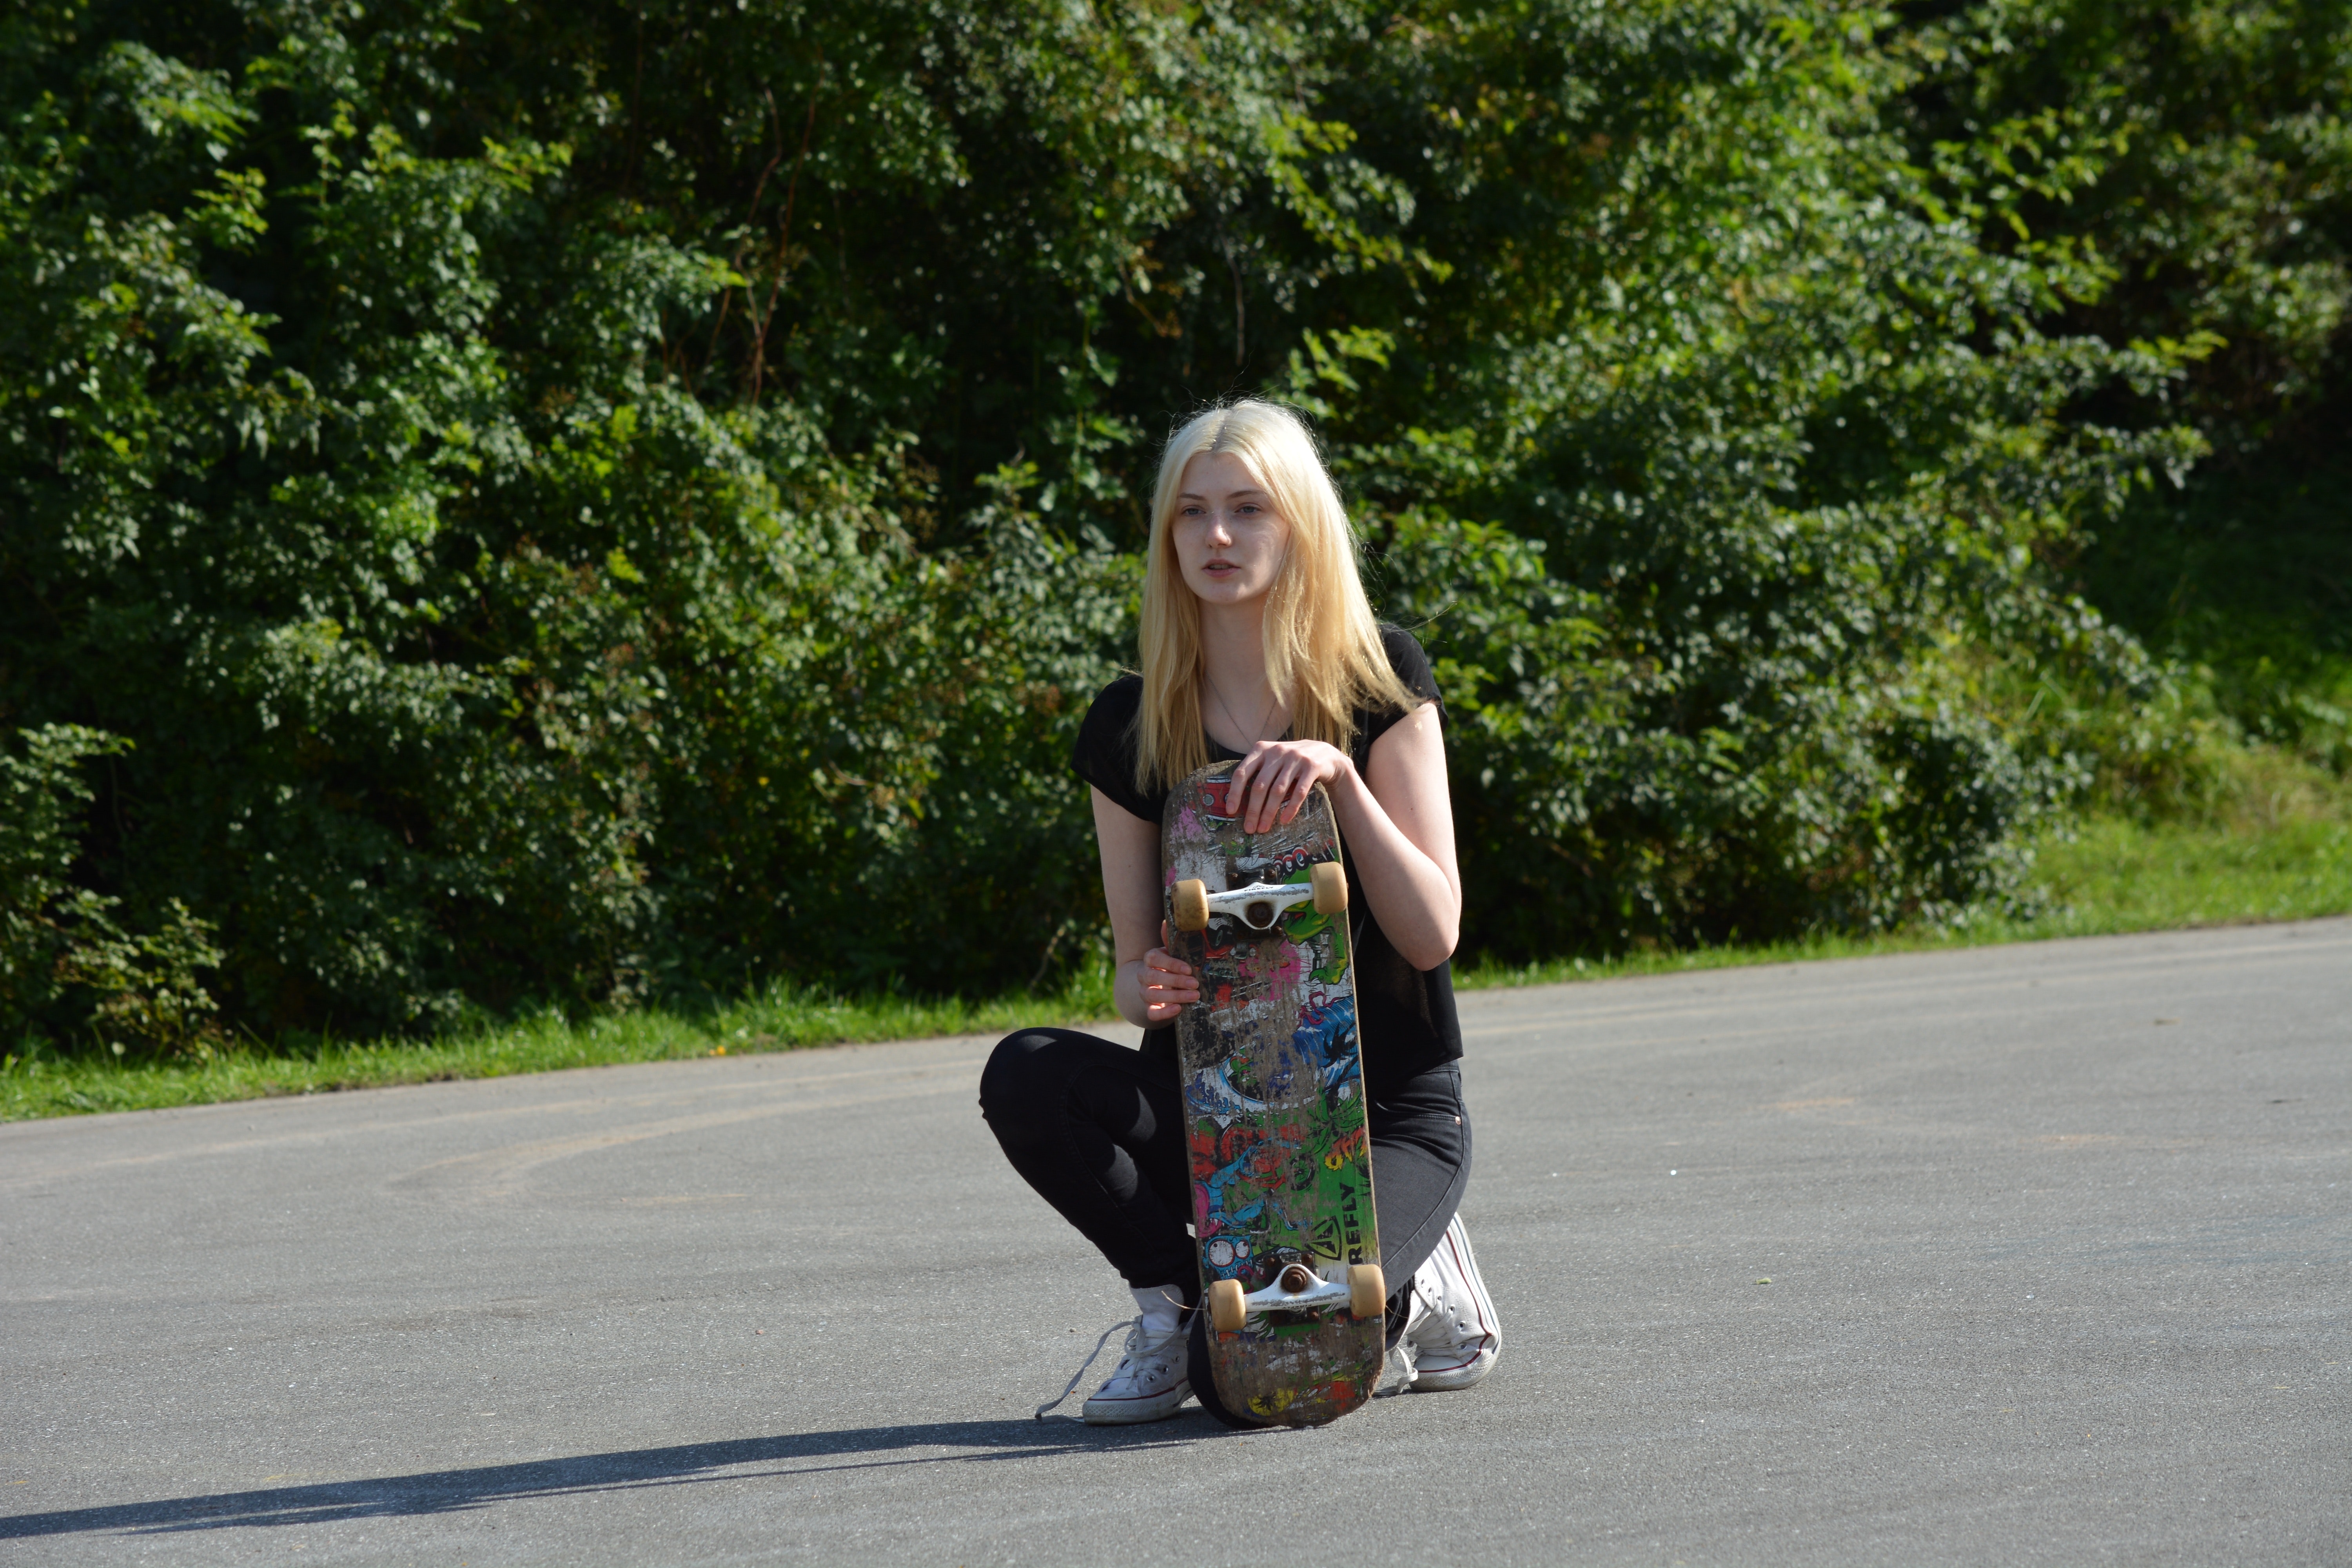 Woman in black shirt and pants holding skateboard during daytime photo